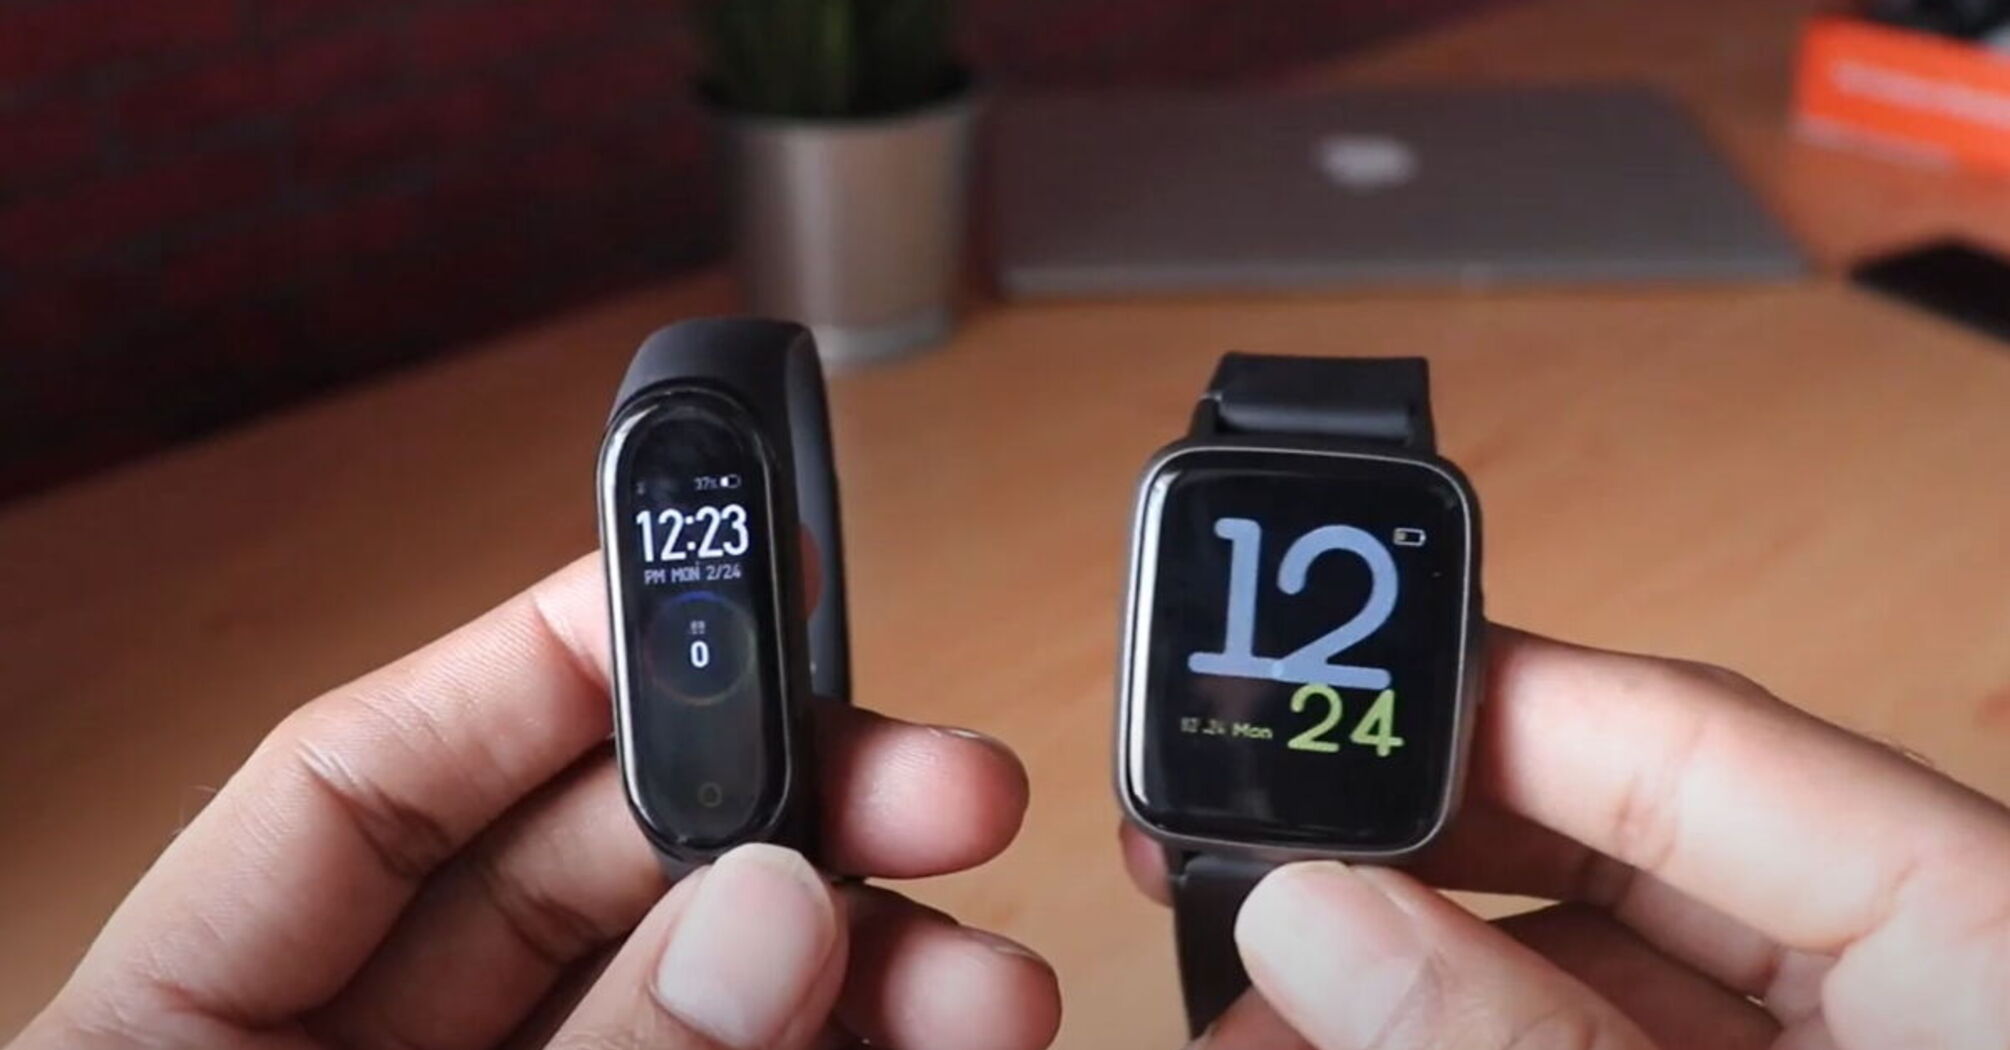 Comparing fitness trackers and smartwatches